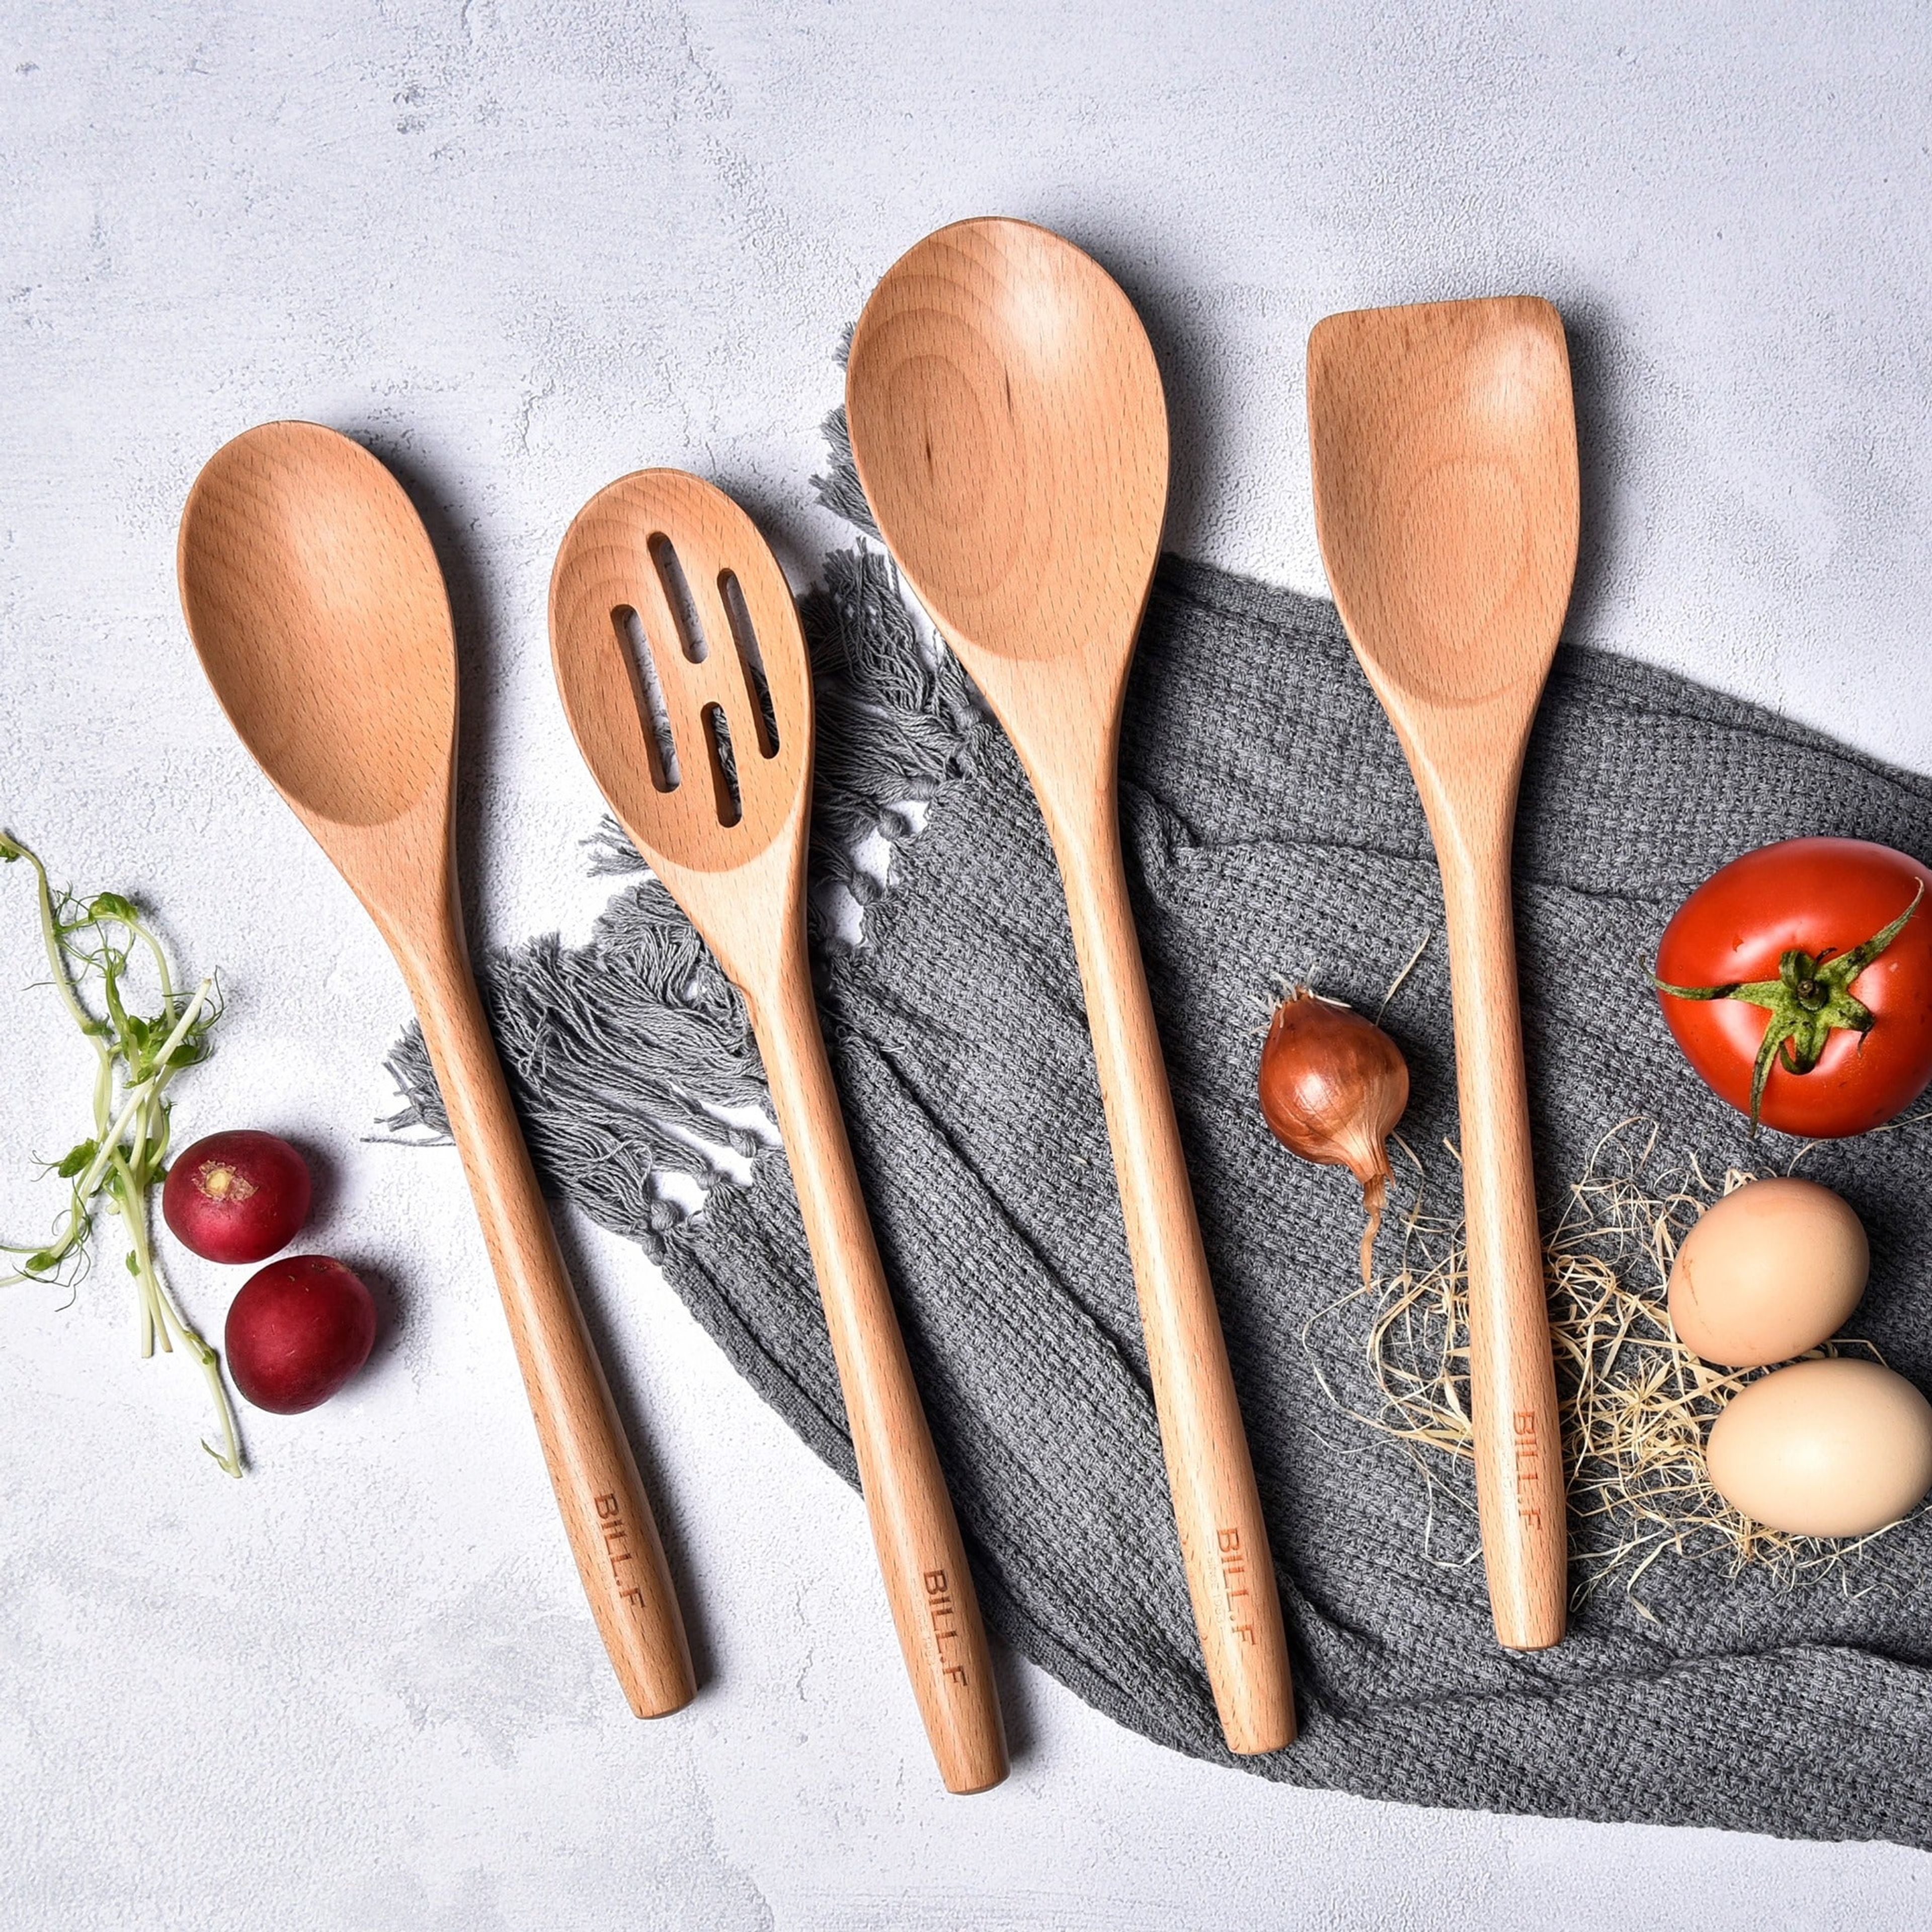 Wooden Cooking Utensils Set of Spoons 4-Piece Kitchen Utensil Set for Non-Stick Cookware